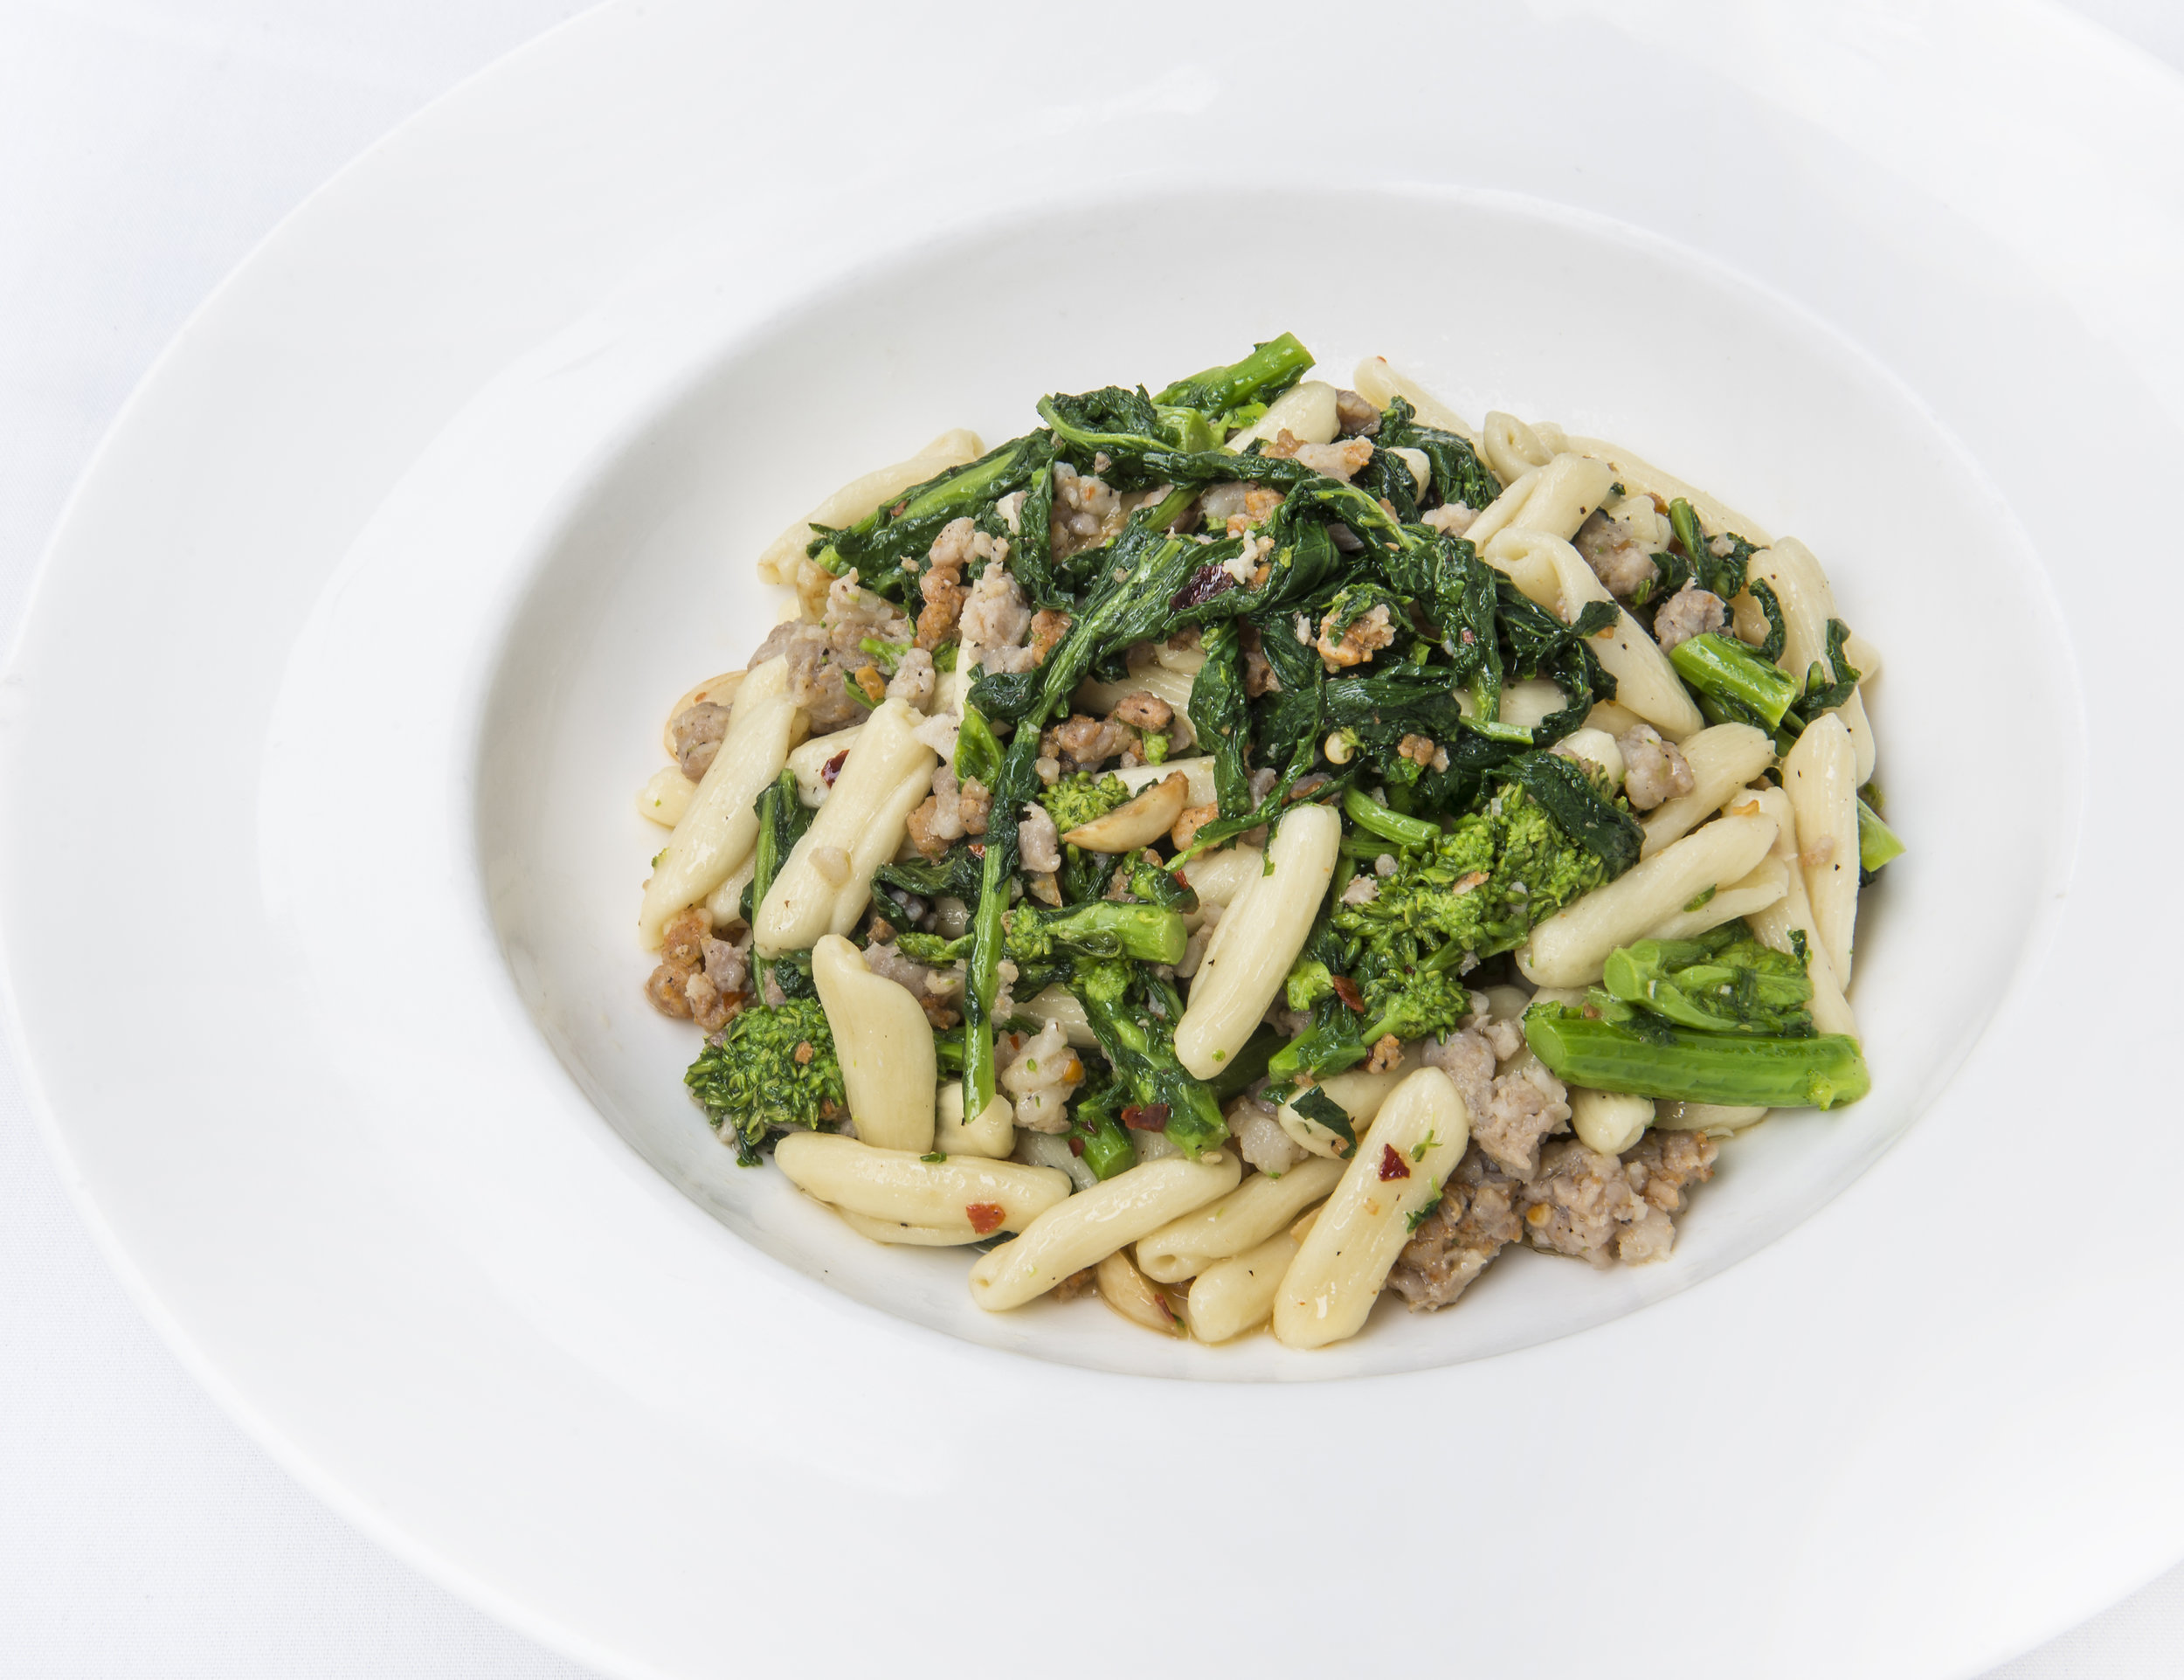 VAGO - Broccoli Rabe Pasta with sausage - photo by Andrew Werner.jpg